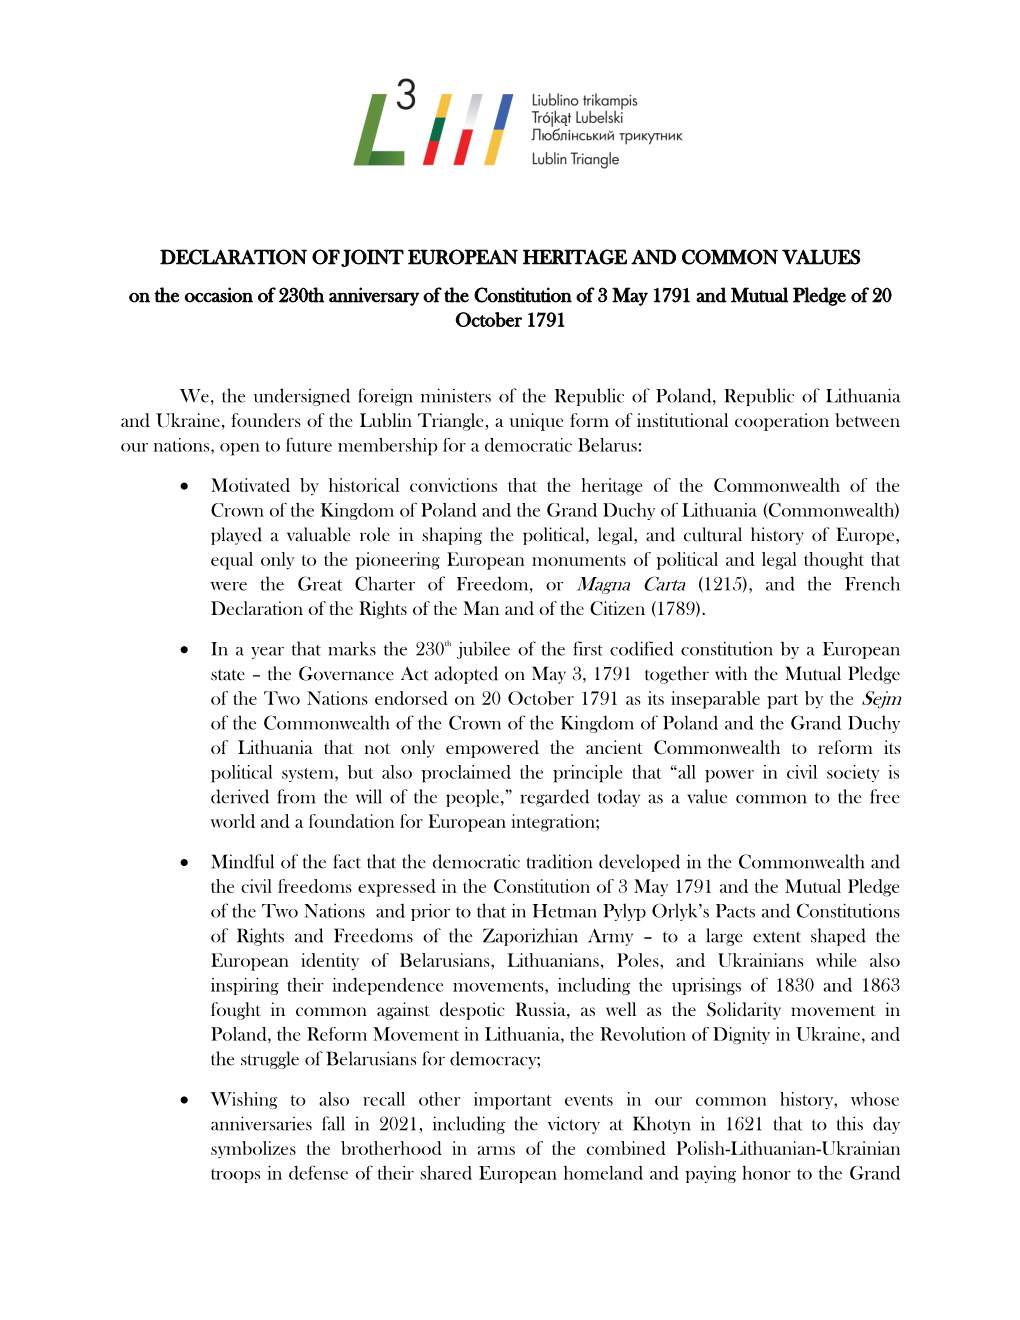 DECLARATION of JOINT EUROPEAN HERITAGE and COMMON VALUES on the Occasion of 230Th Anniversary of the Constitution of 3 May 1791 and Mutual Pledge of 20 October 1791